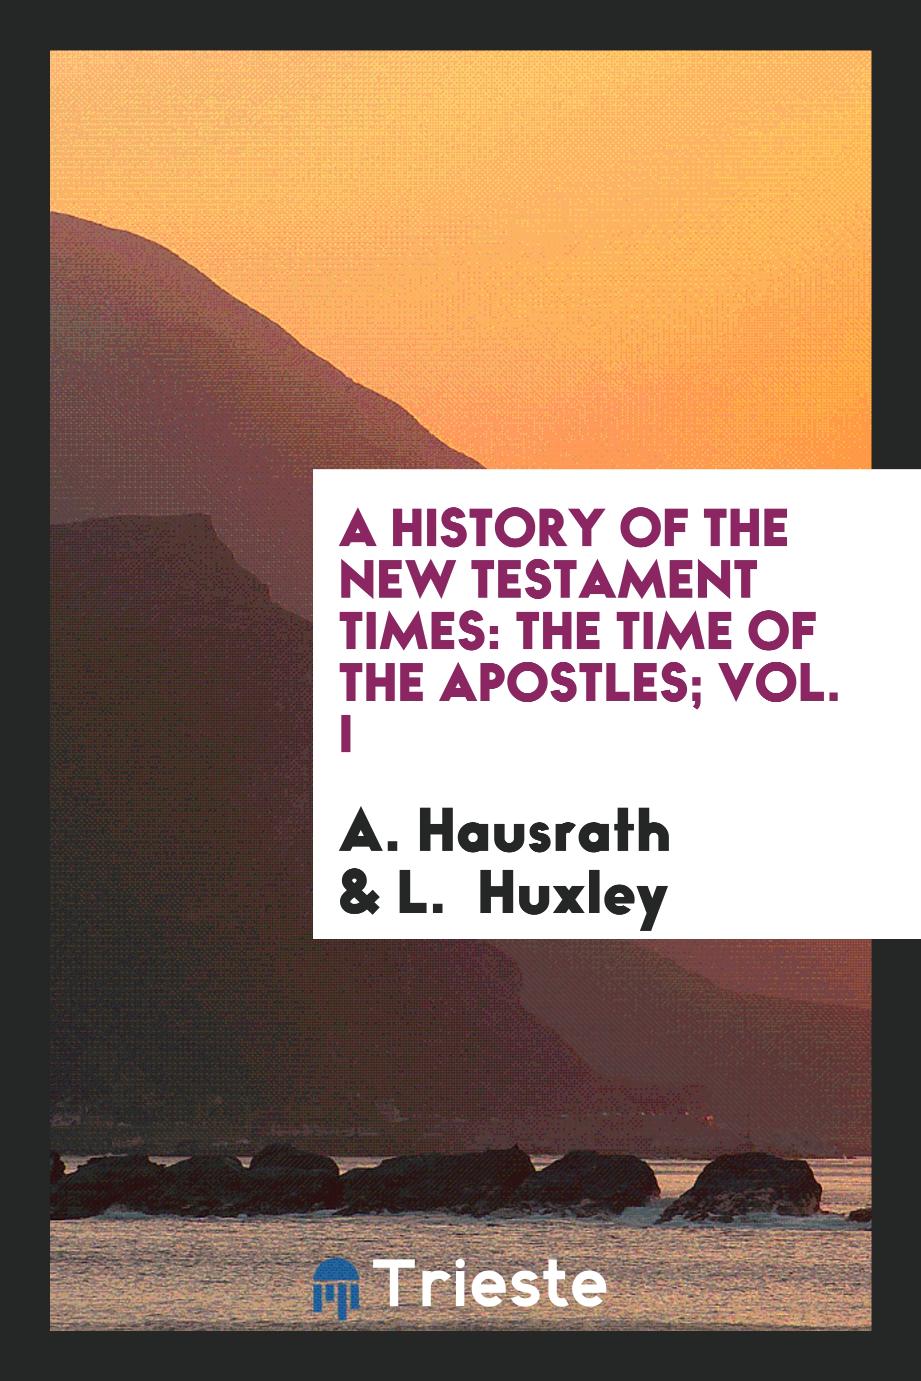 A history of the New Testament times: the time of the Apostles; Vol. I